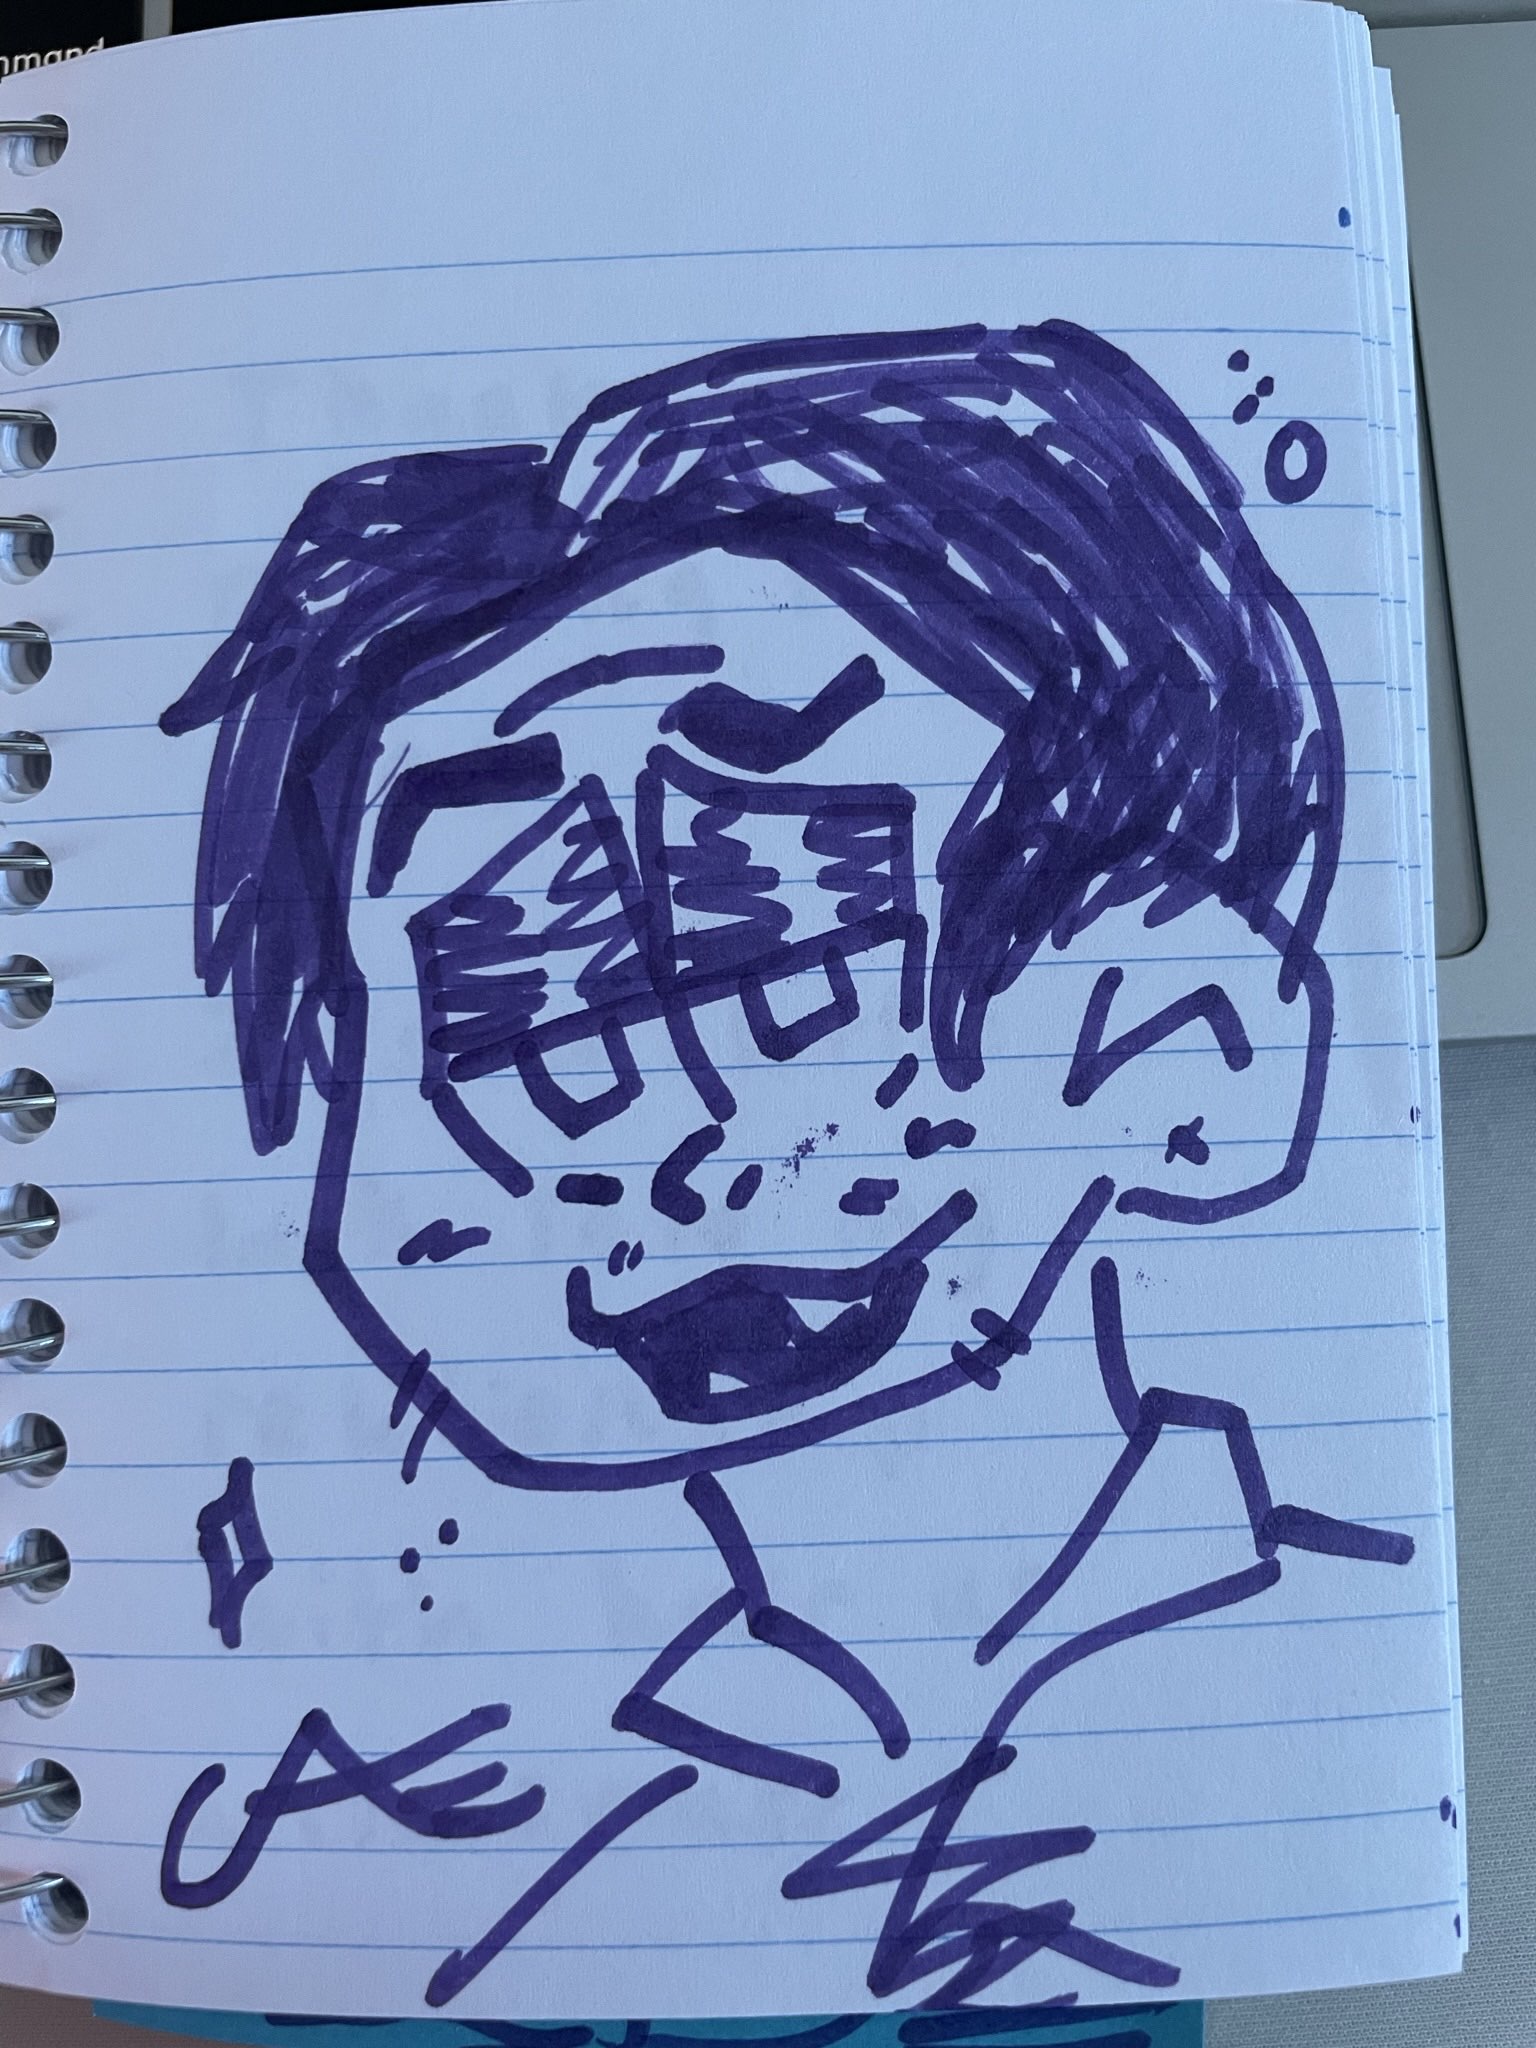 a stylized cartoon of myself i have darkened upper lids denoting how tired i am, I have a styled and slicked back short masculine hairstyle. i drew myself with fangs. my signature CAE is in the bottom left corner